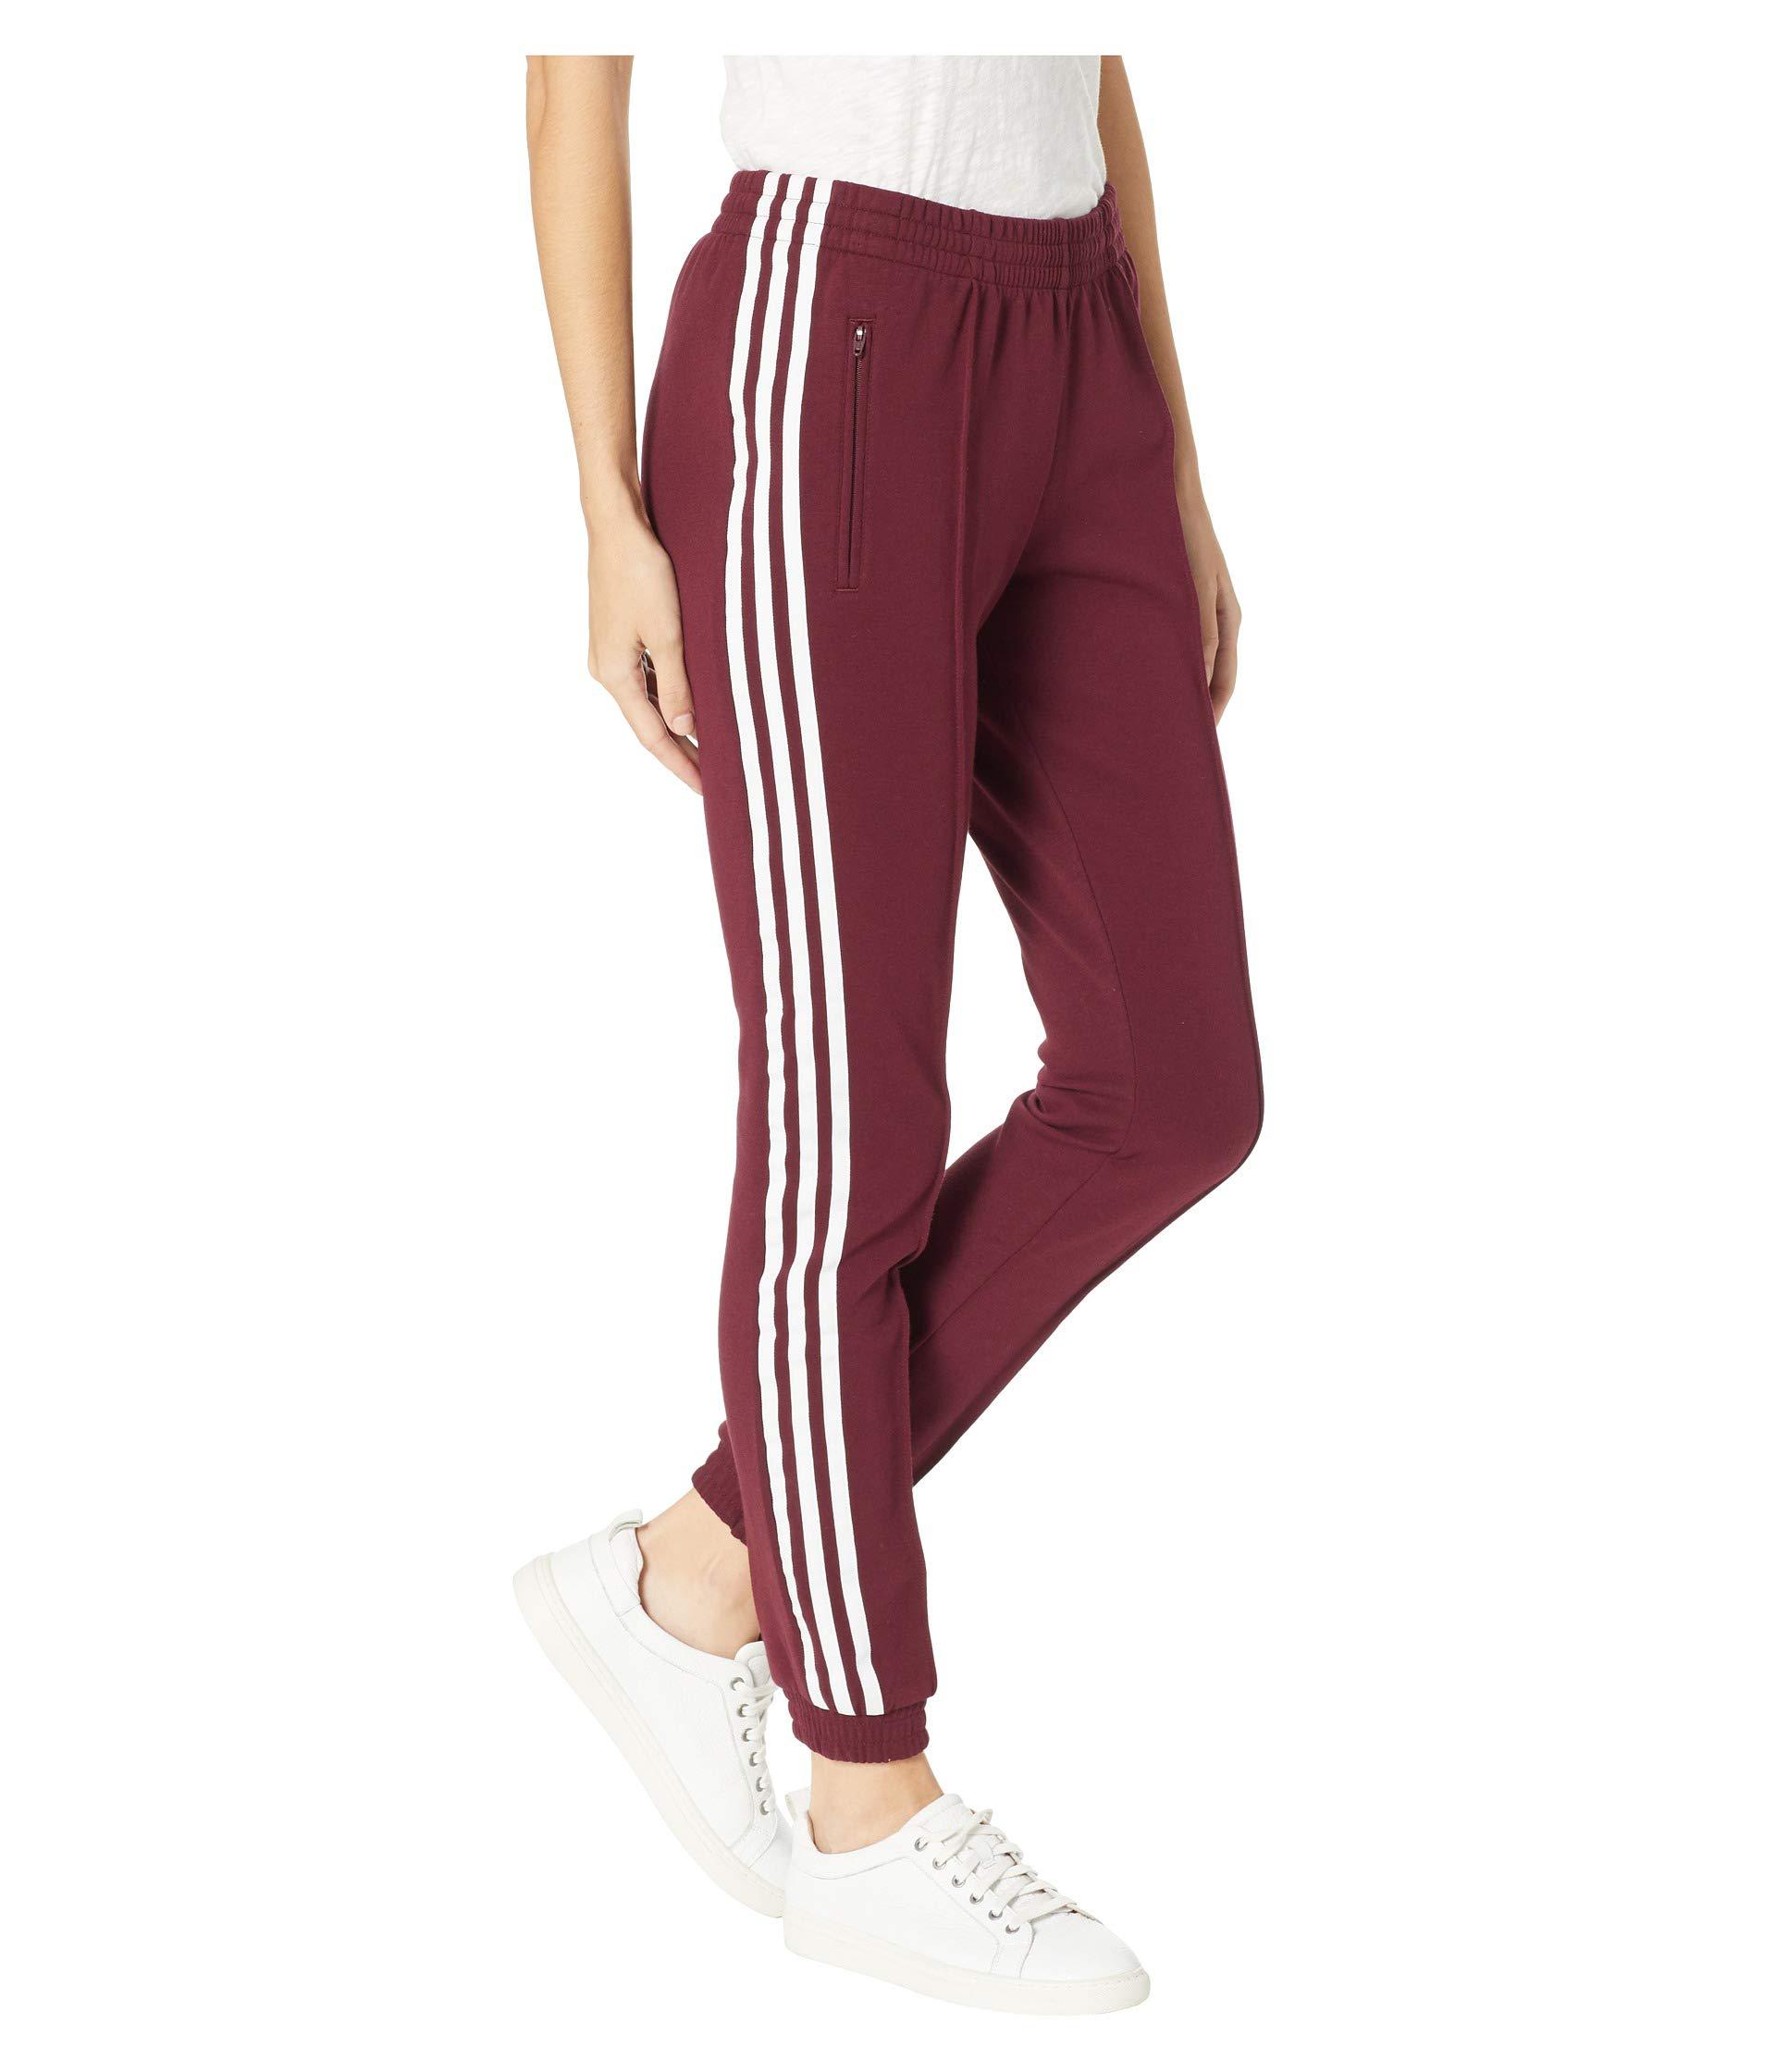 adidas Originals Cotton Clrdo Sst Track Pants (maroon) Women's Casual Pants  in Red - Lyst